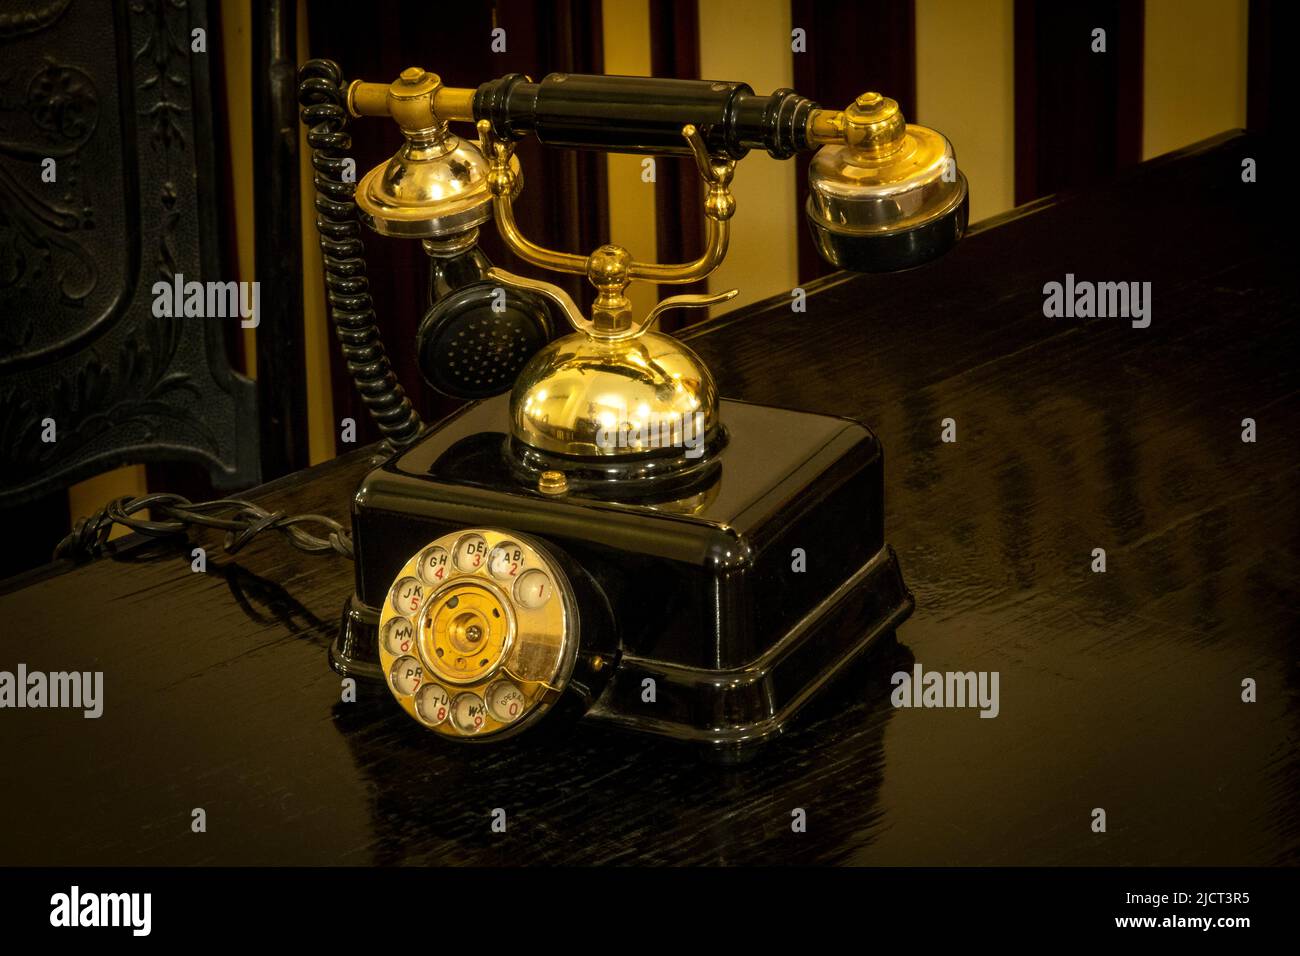 Vintage telephone on a dark wooden desk at the Old Cataract Hotel, Aswan, Egypt, Africa Stock Photo